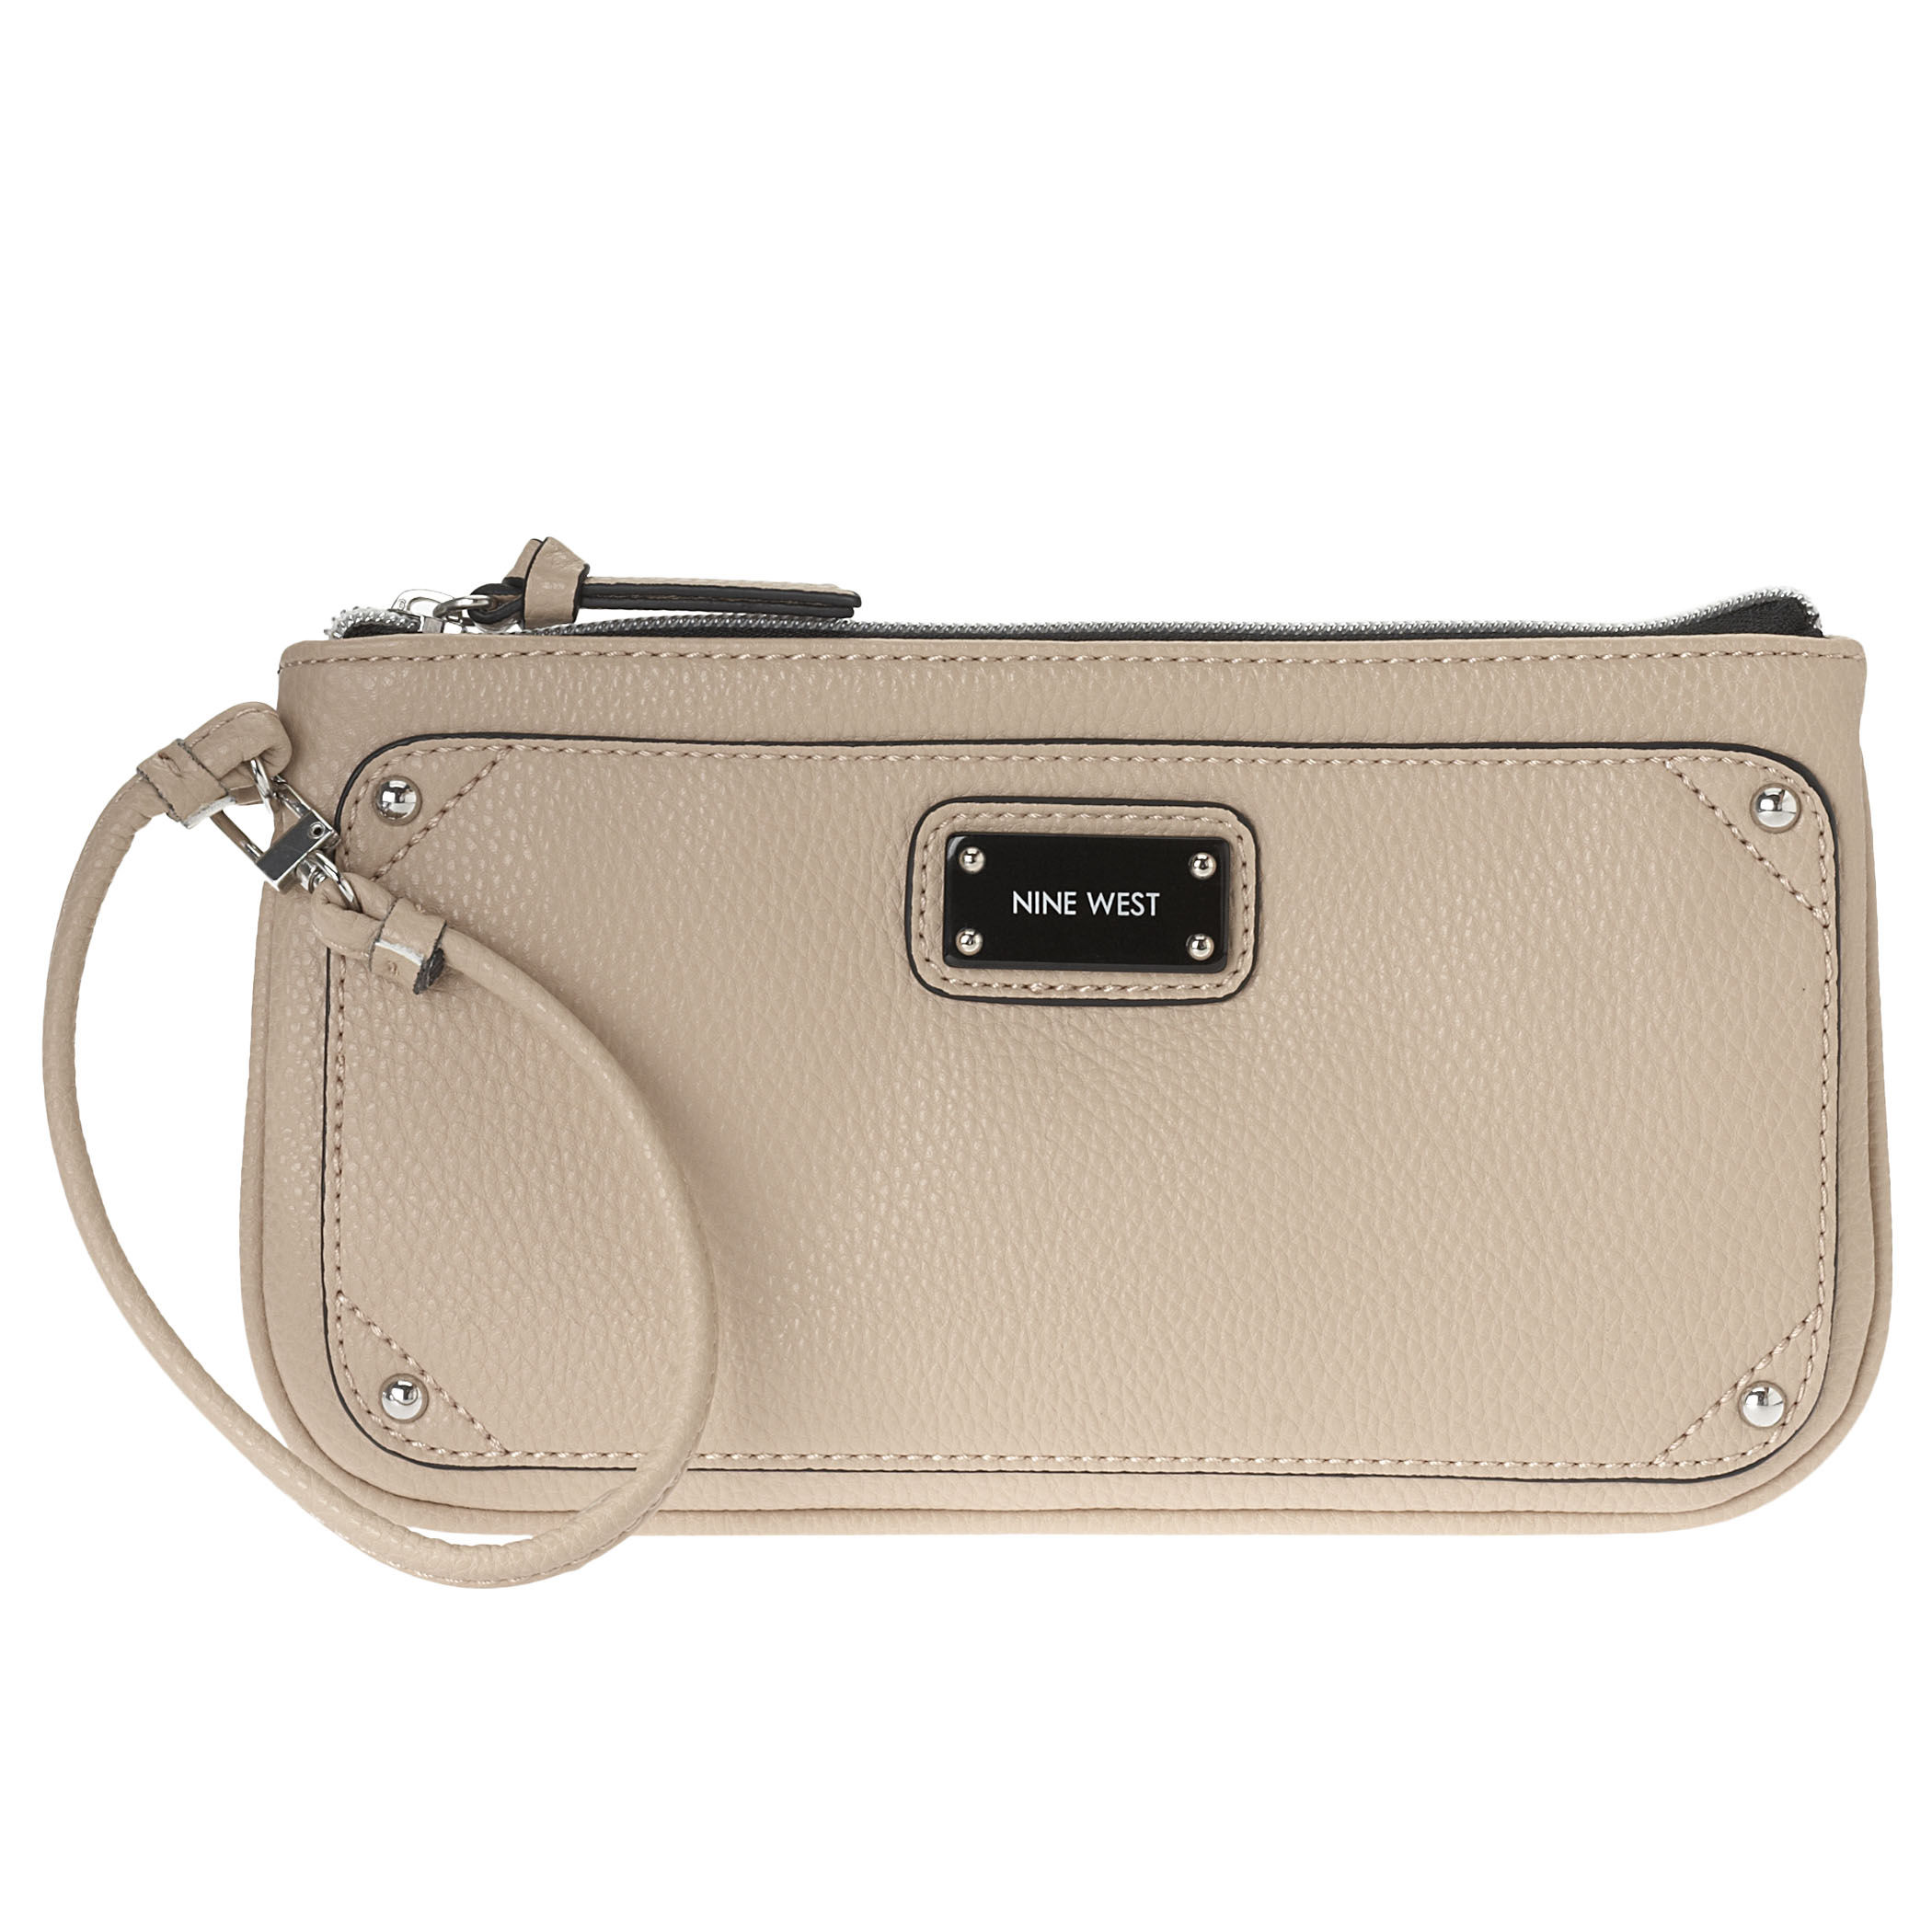 Nine West Double Vision Wristlet in White (BISCOTTI) | Lyst